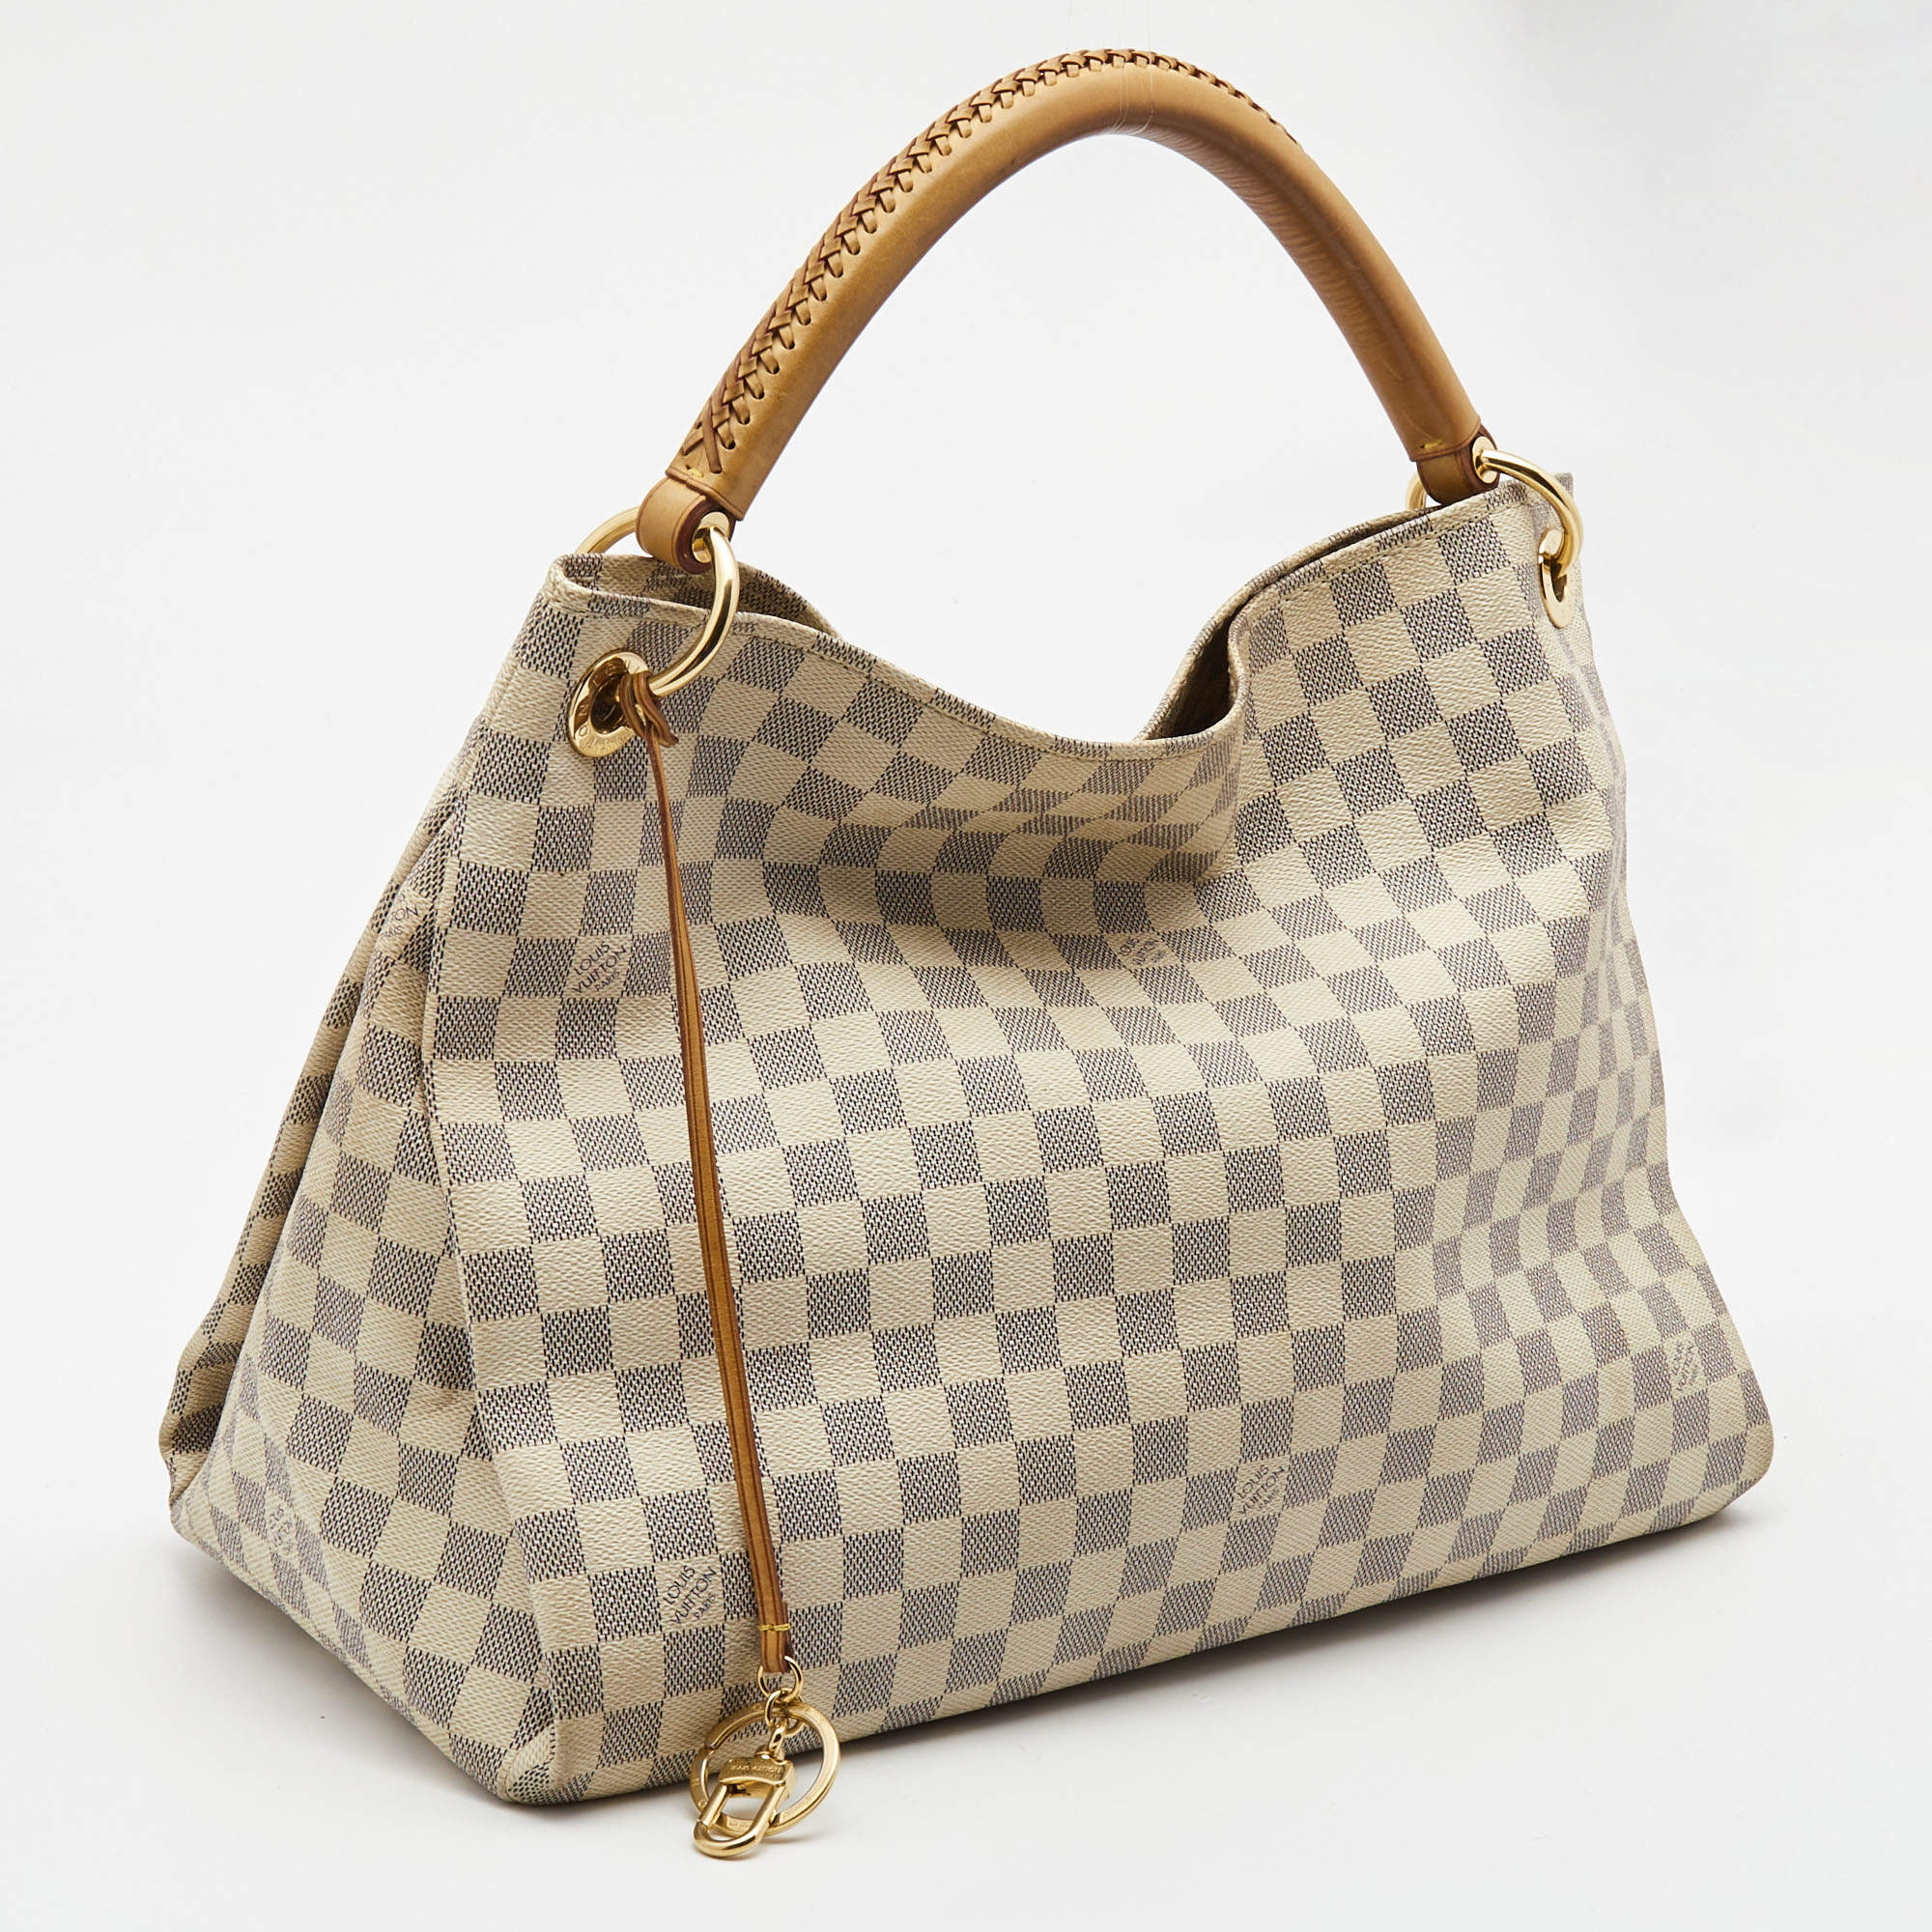 Louis Vuitton, Large Artsy Damier Azur Canvas Bag, Creamy White And Blue  Checkered Rubberized Cotton